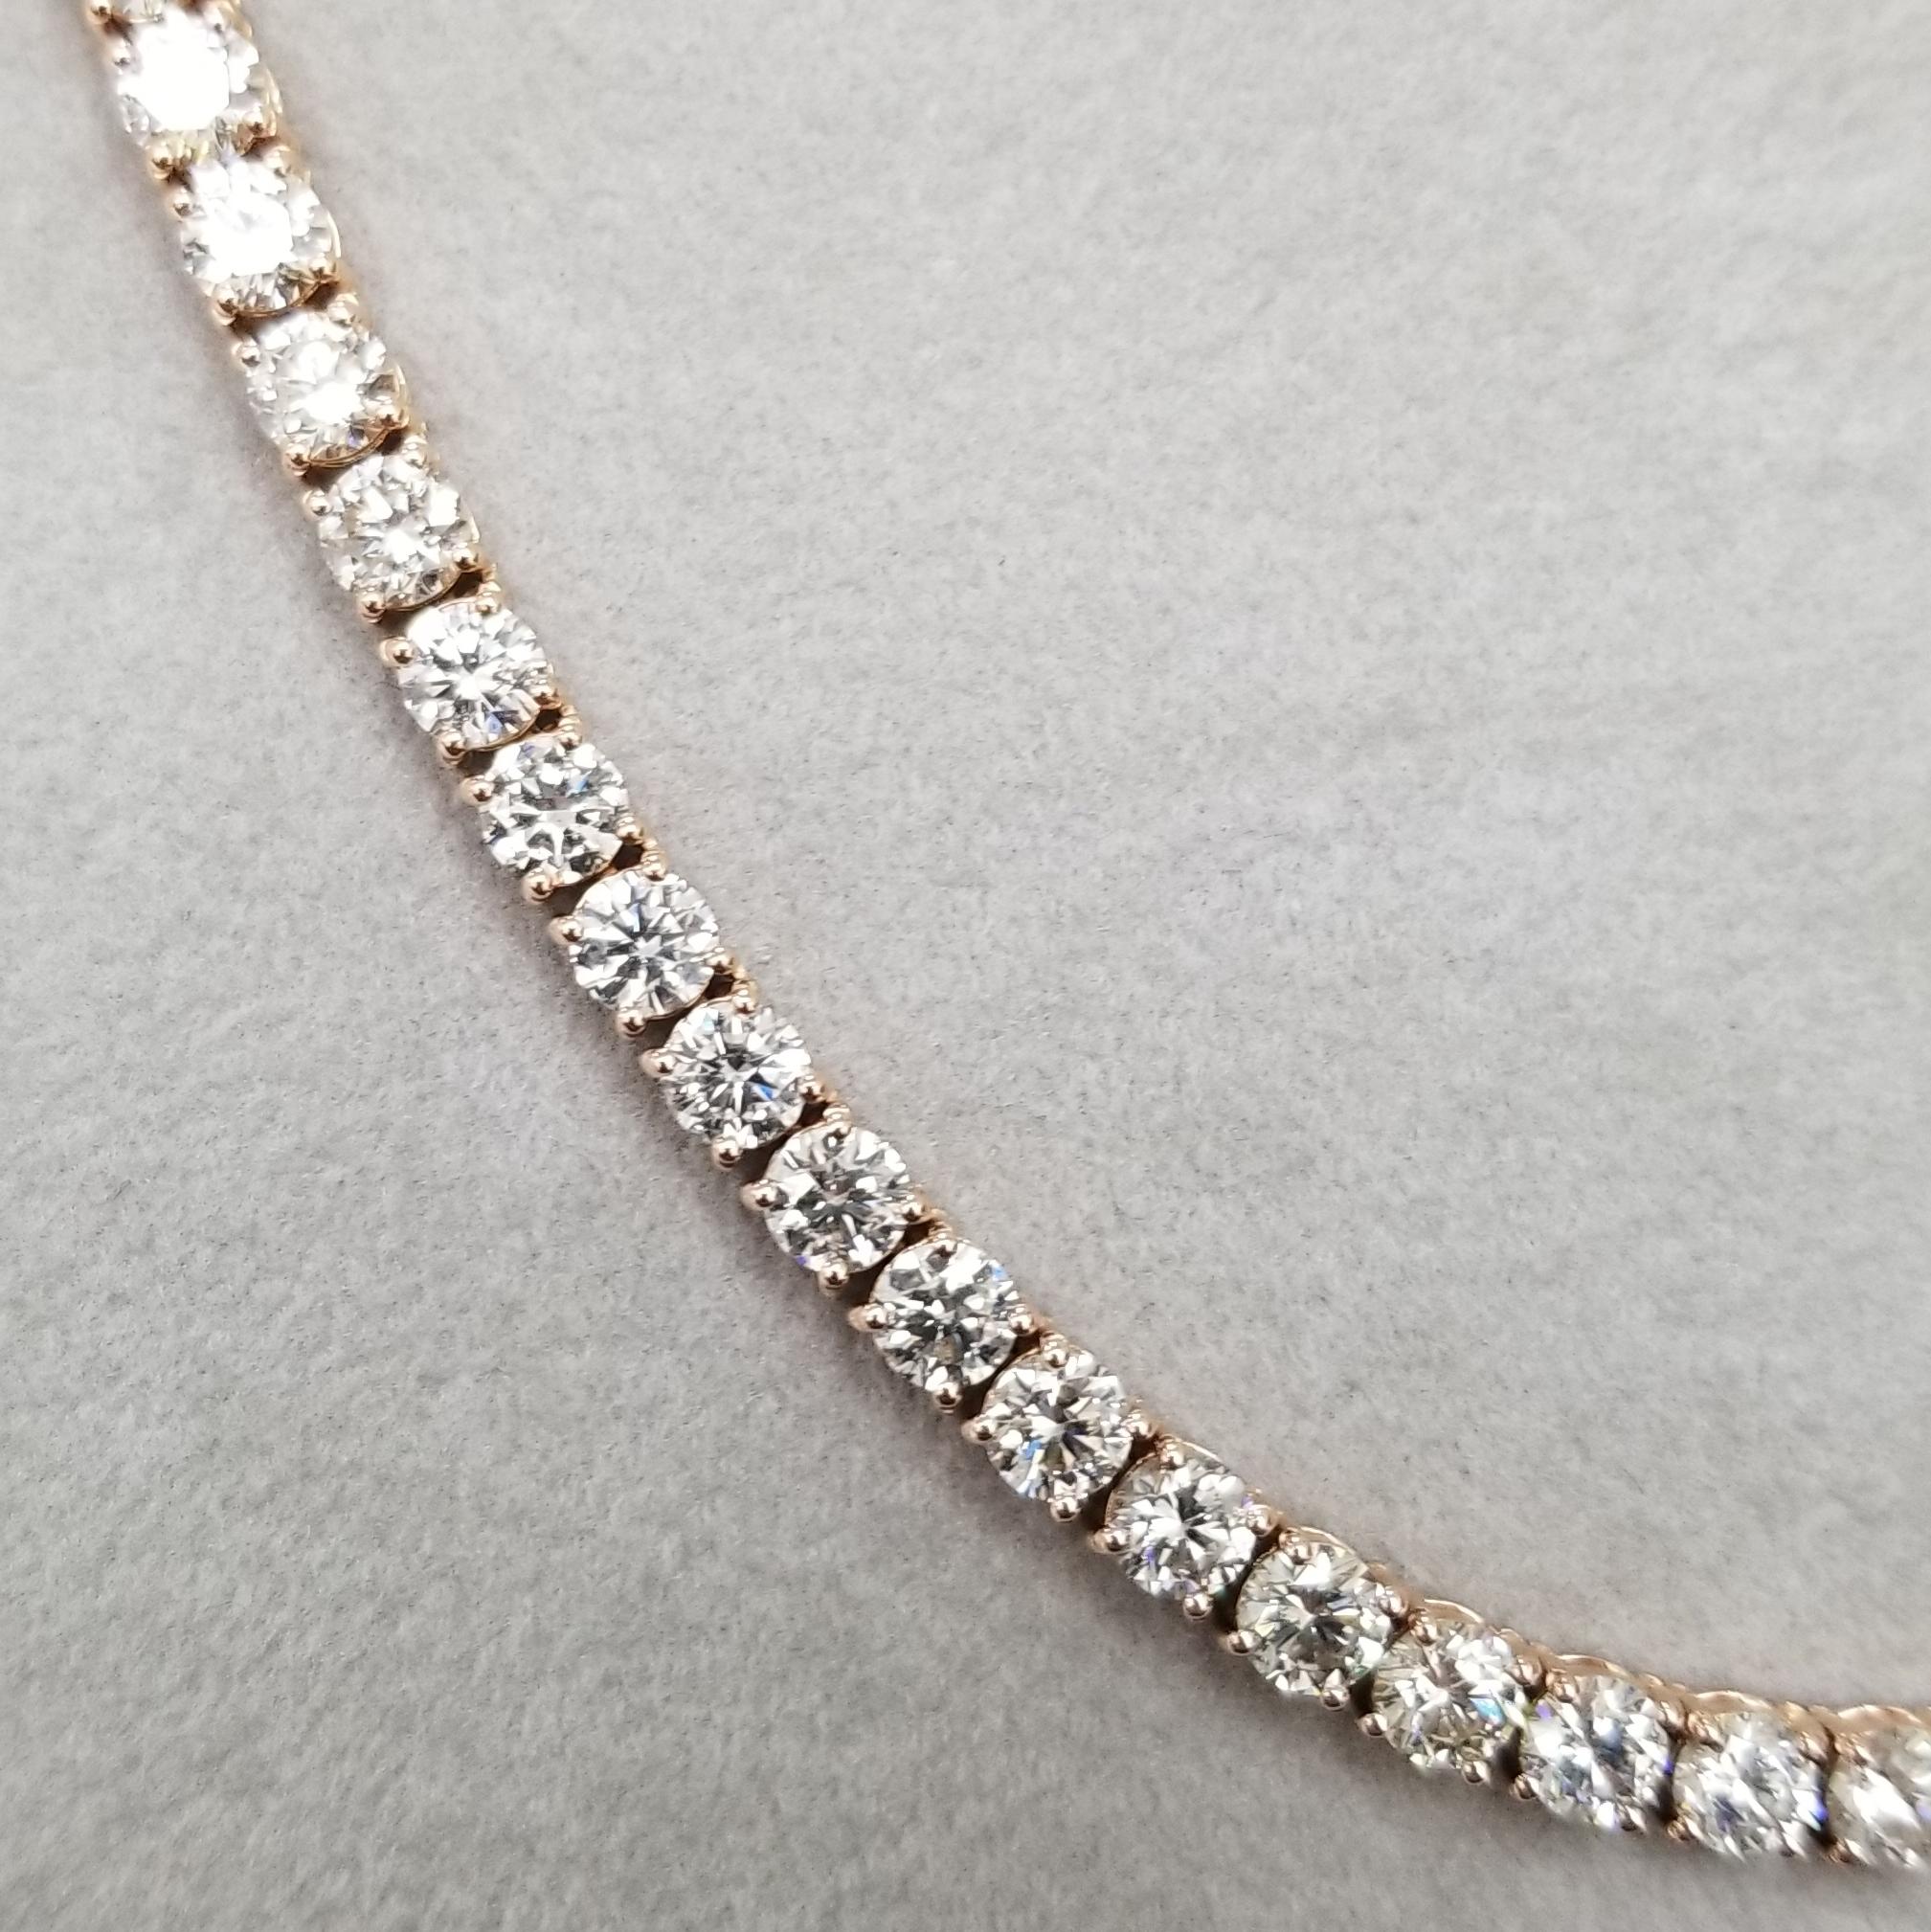 14k rose gold 4 prong diamond necklace, containing 
 Specifications:
    main stone: ROUND CUT DIAMONDS
    diamonds: 94 PIECES
    carat total weight: 24.98cts.
    center diamond:  4.1mm
    color: H
    clarity: VS2
    brand: custom
    metal: 